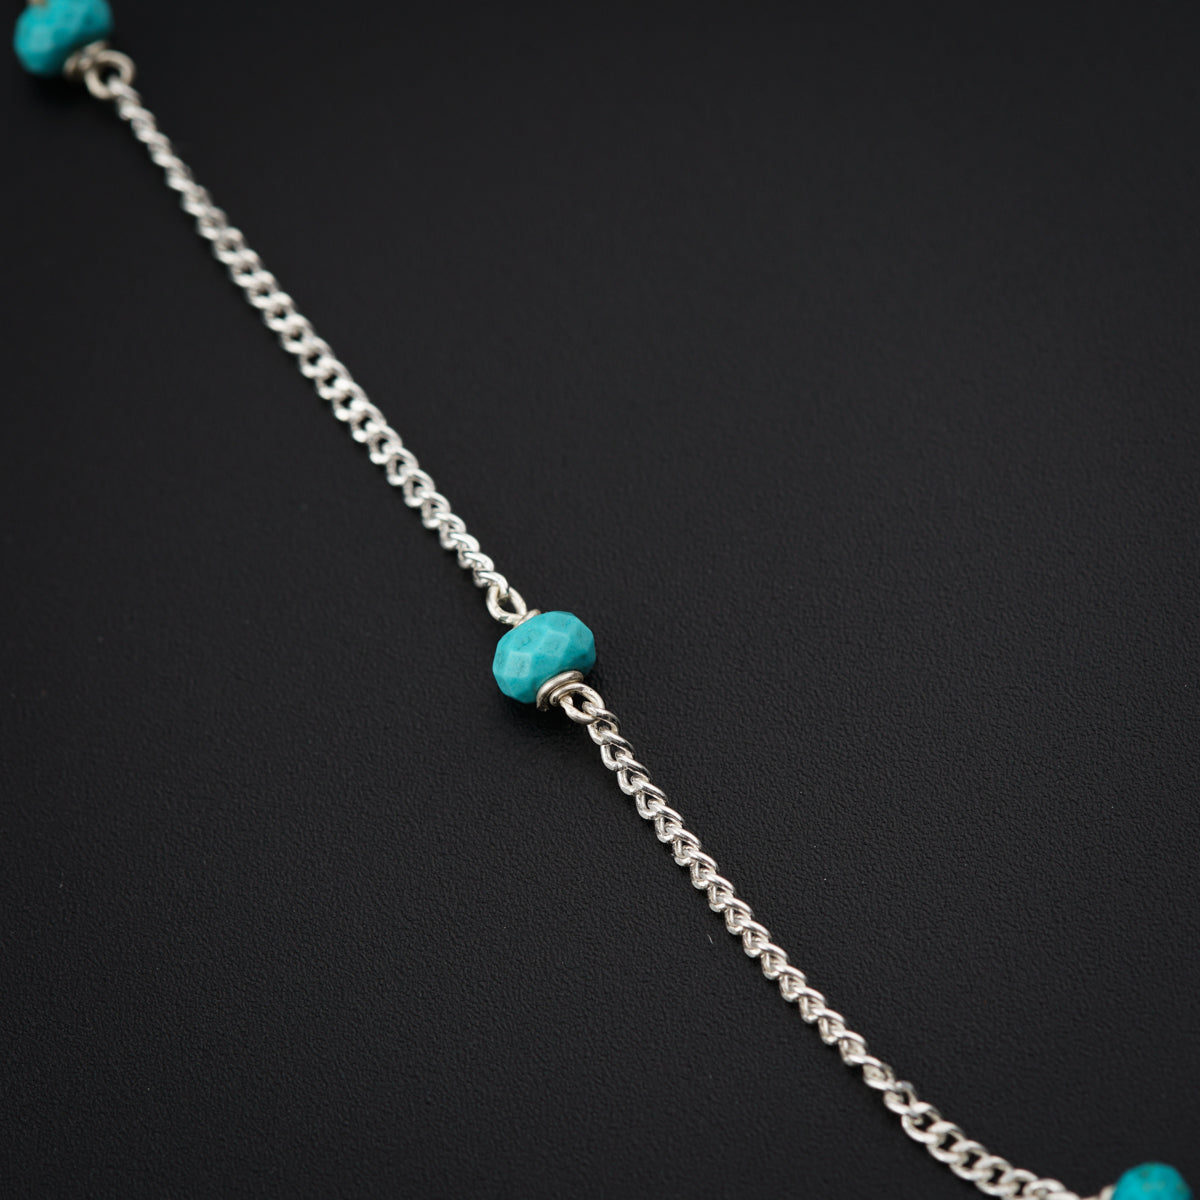 a silver chain with a turquoise bead on it